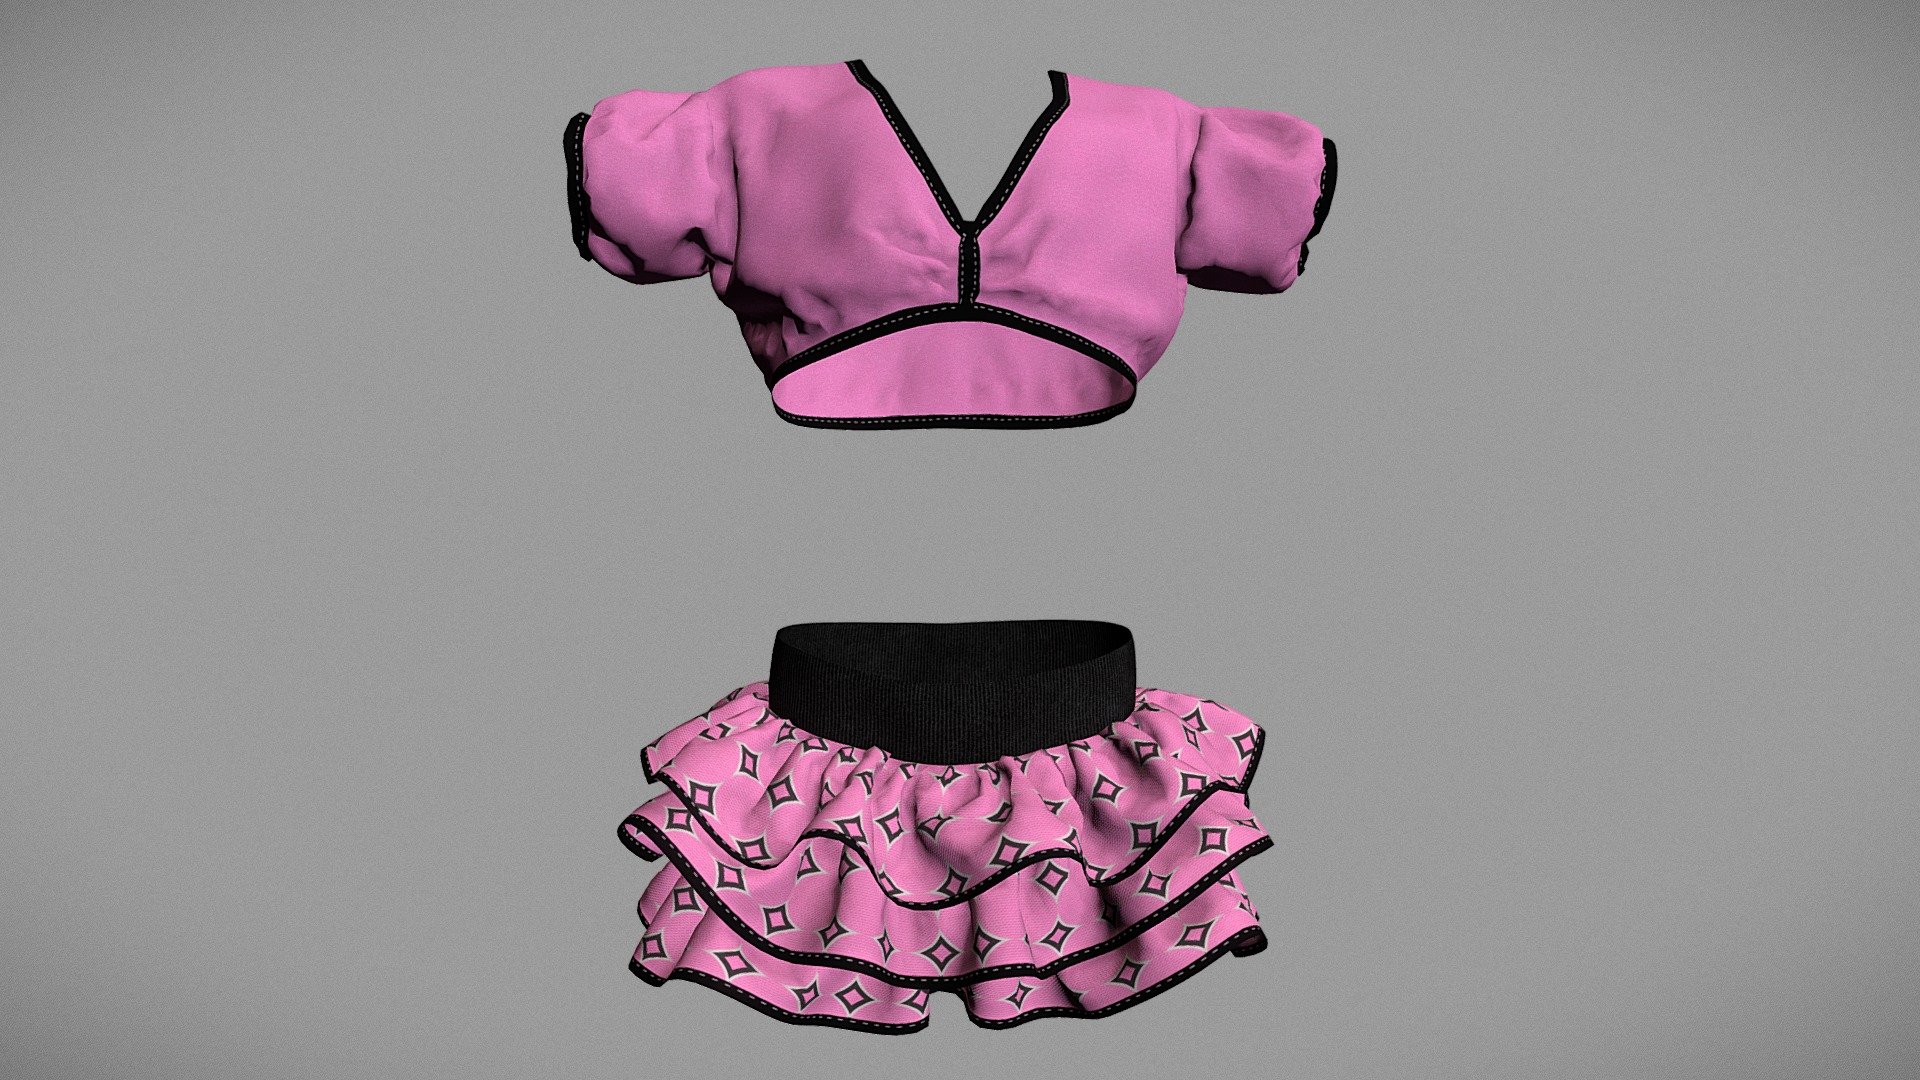 2019 NFTS Motion Capture project

Outfit was made and simulated in Marvelous Designer 

Wath here https://youtu.be/-pPbgvLnQKY - Operation Tea Party - outfit - Download Free 3D model by snorriholm 3d model